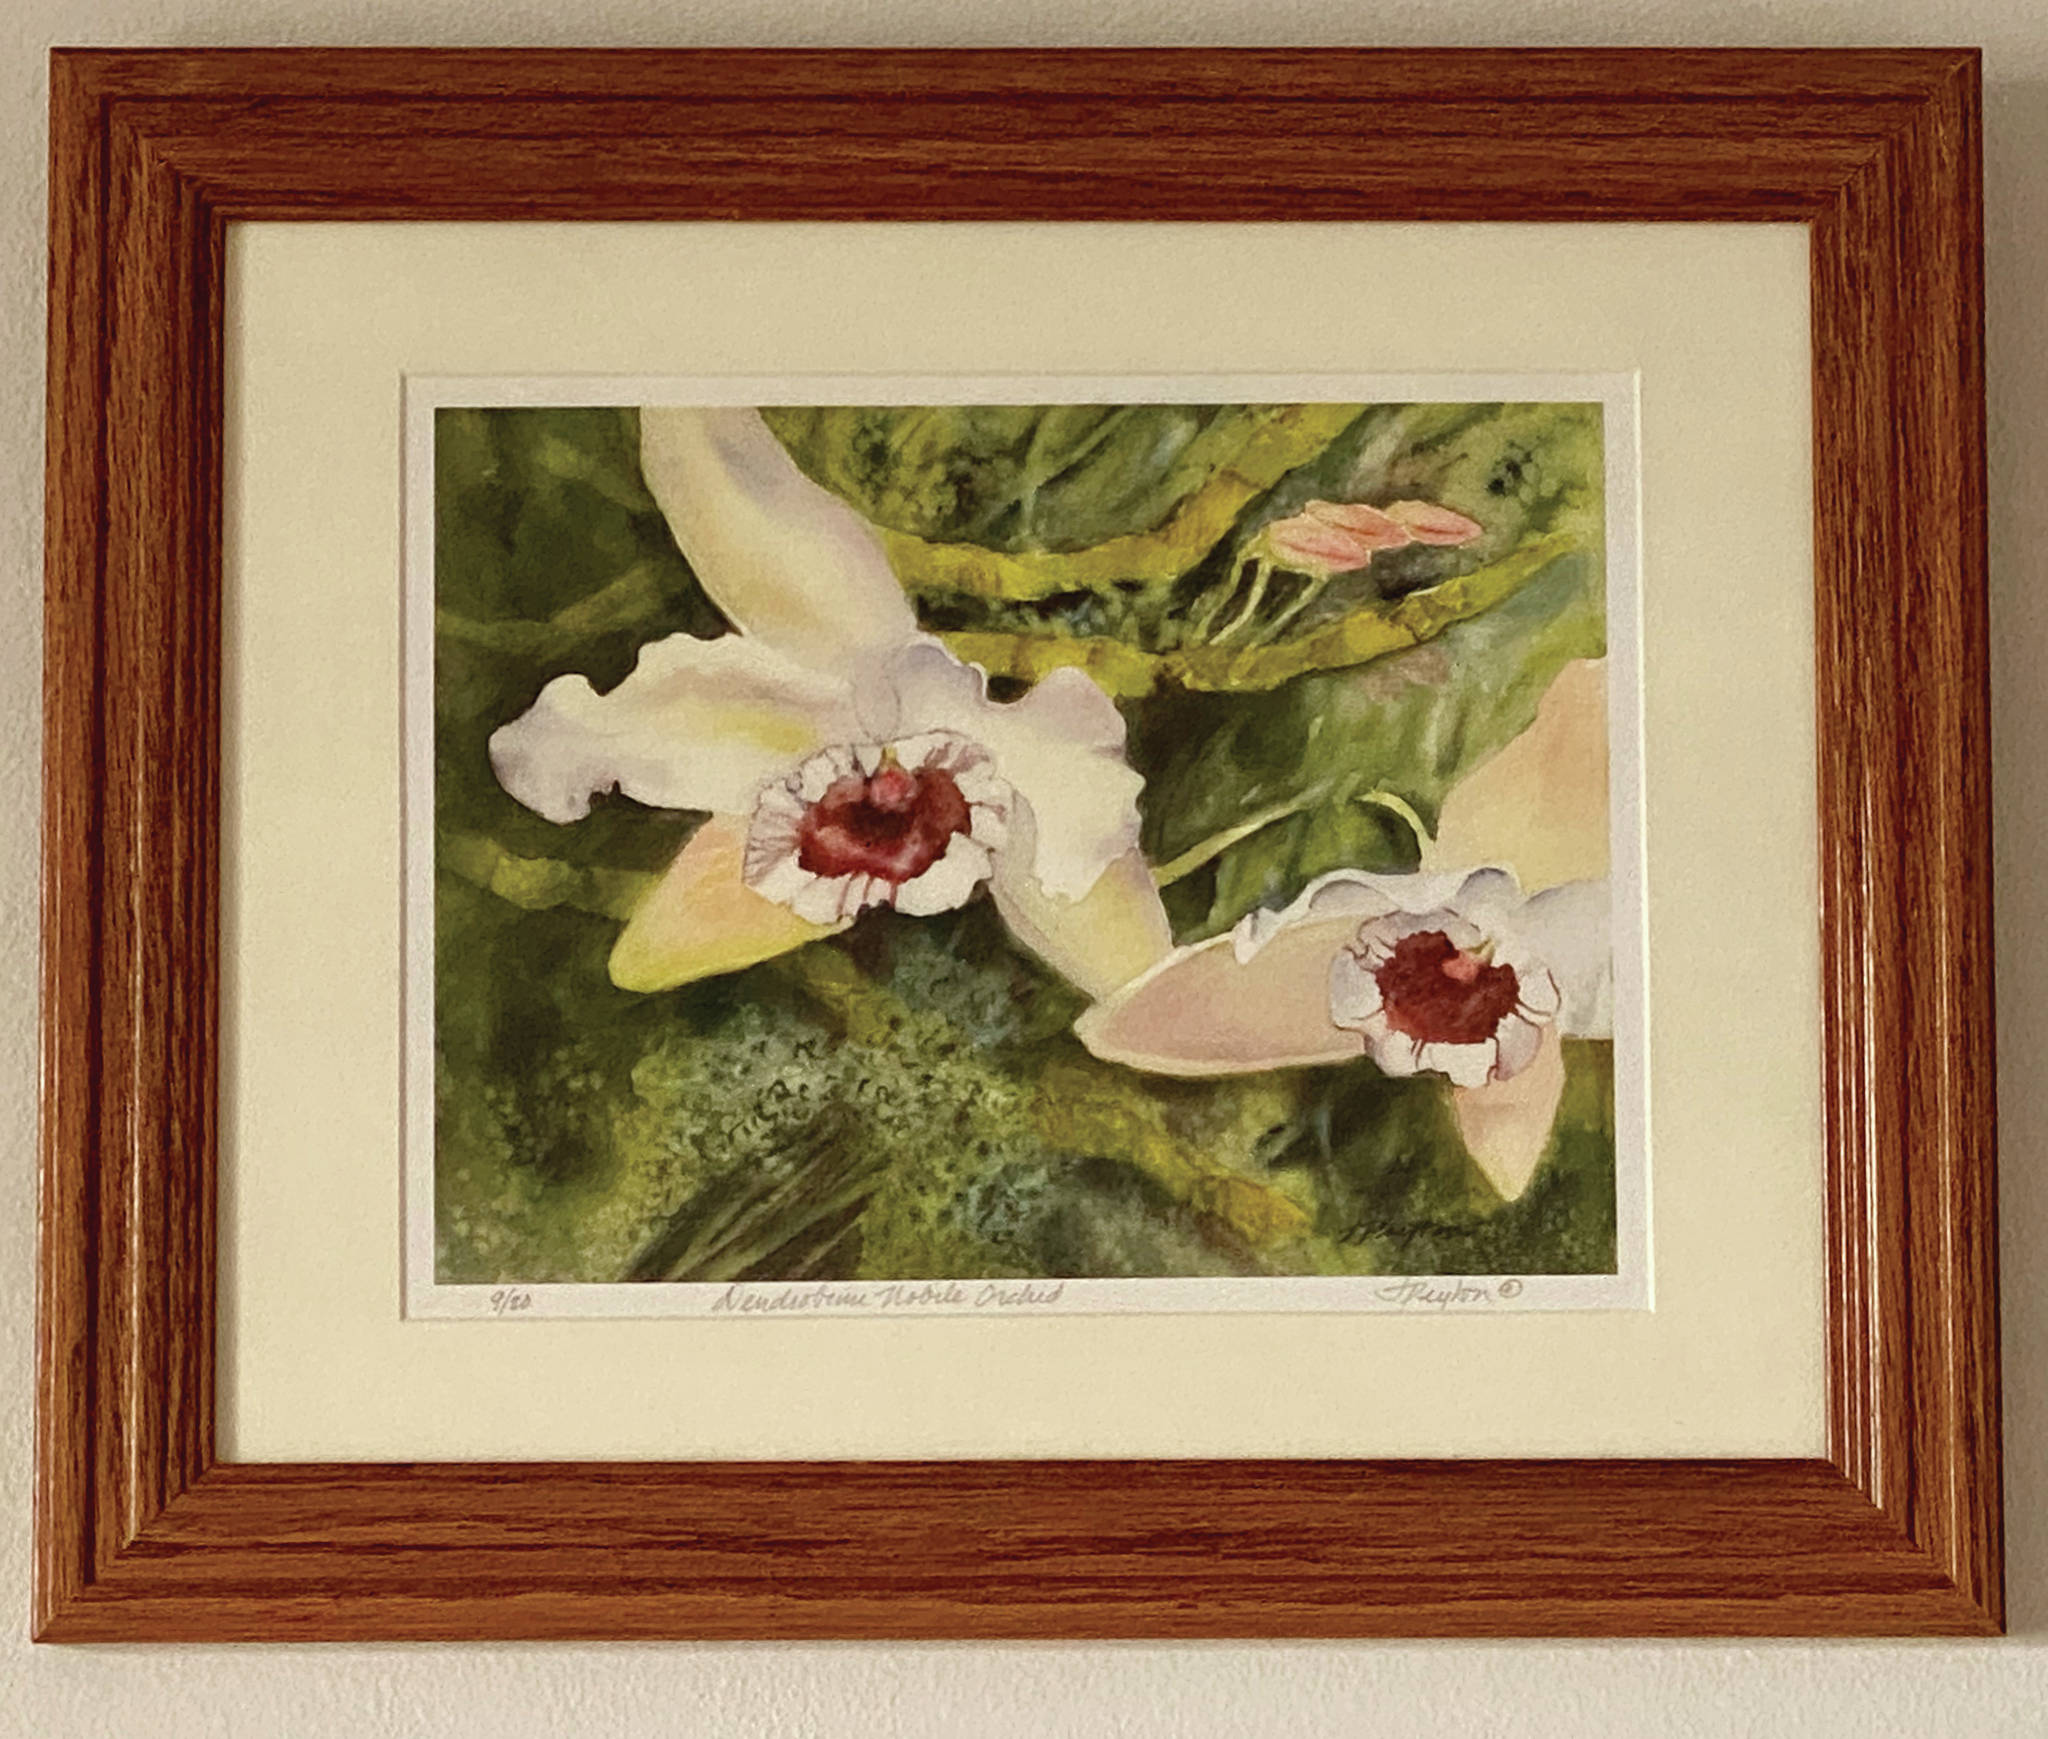 Jan Peyton’s “Orchid” is one of the works of art shown at Grace Ridge Brewery for its October 2020 show benefiting South Peninsula Haven House in Homer, Alaska. (Photo courtesy of South Peninsula Haven House)